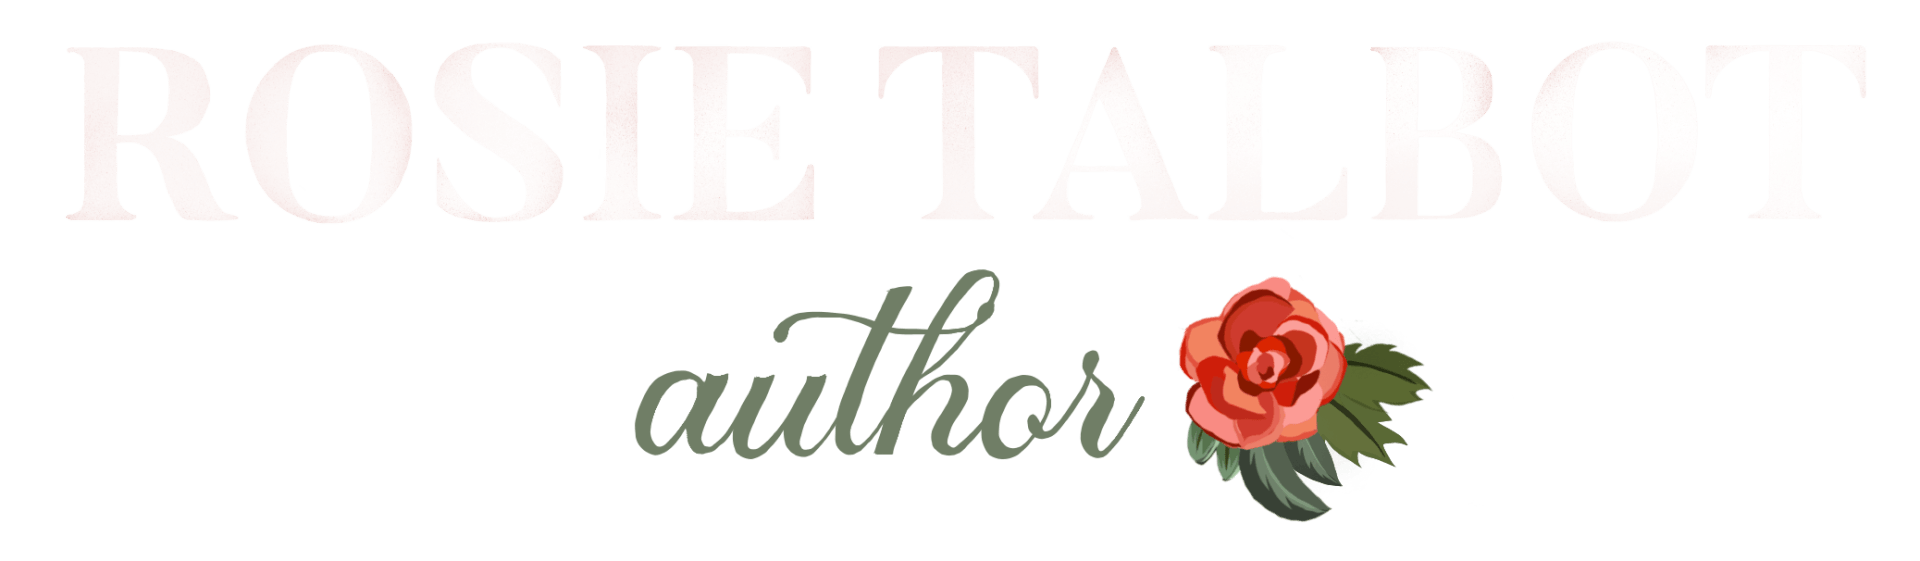 A logo for a book author with a red rose on it.